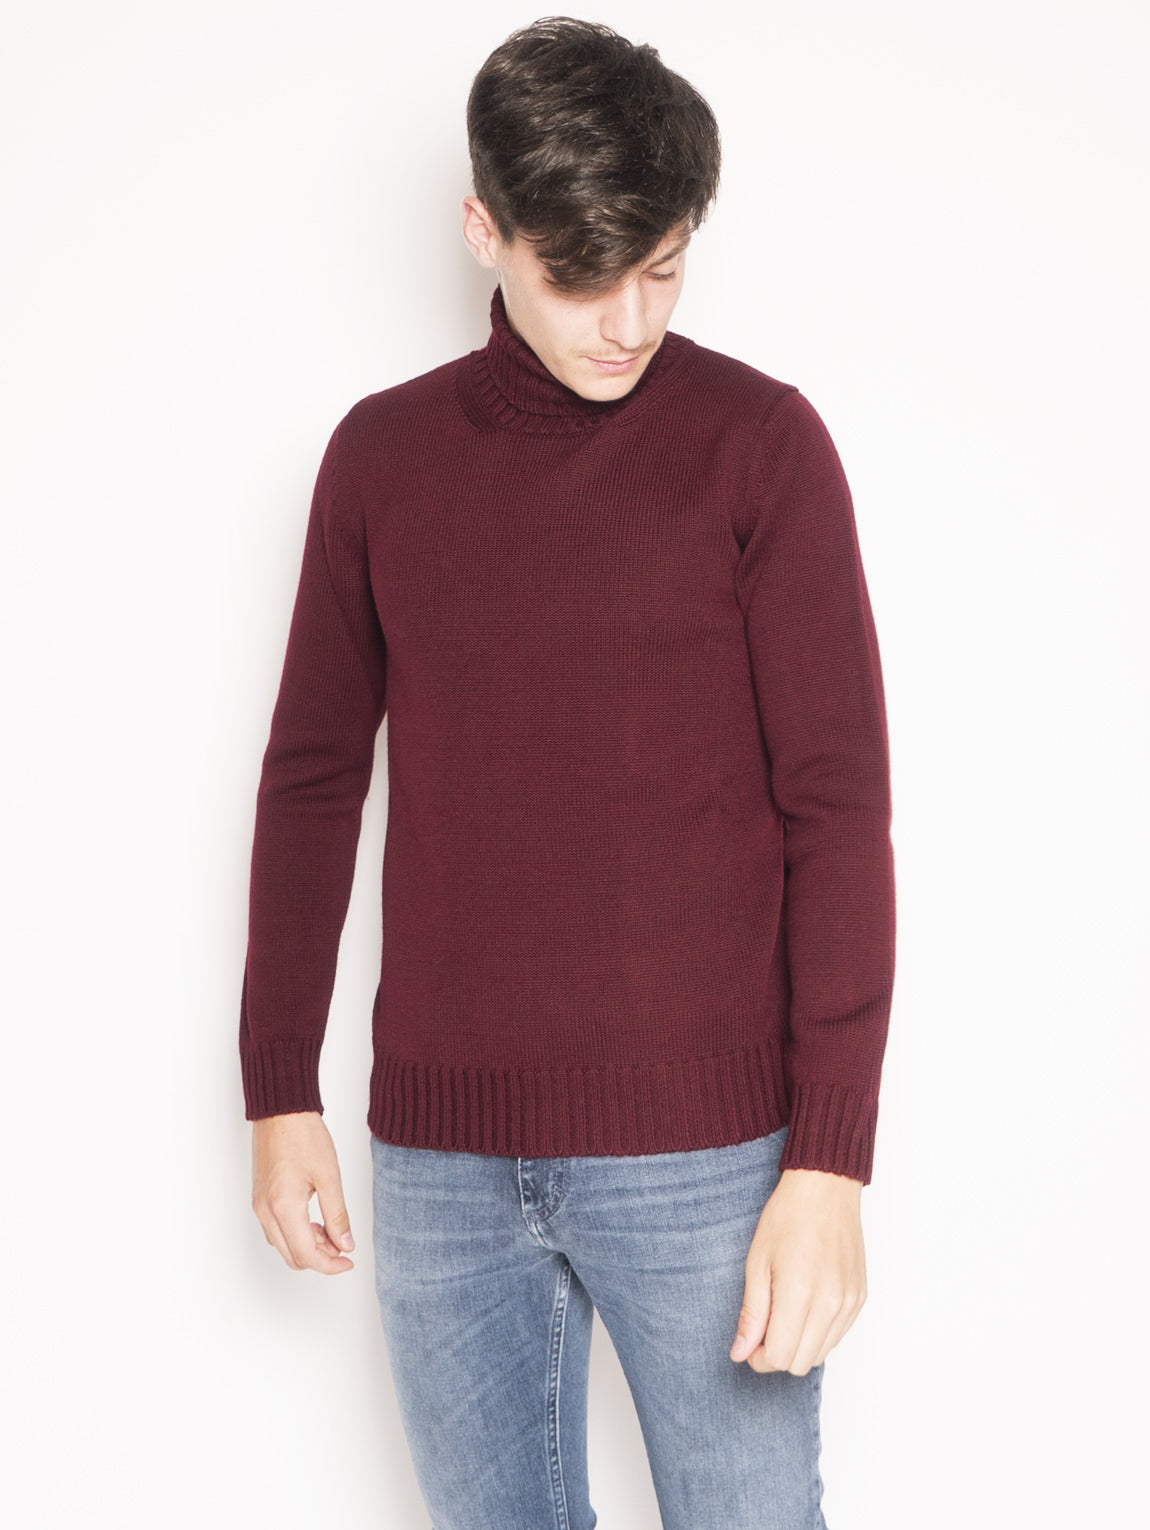 Roter Wollpullover